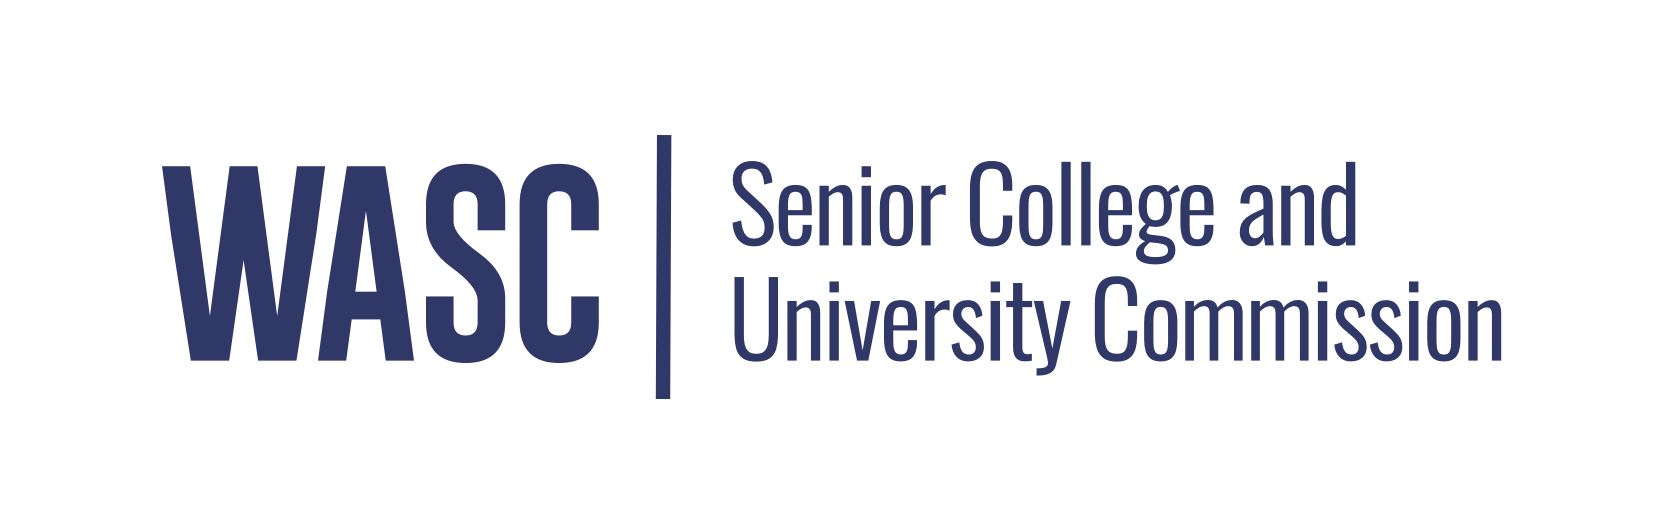 WASC - Senior College and University Commission seal